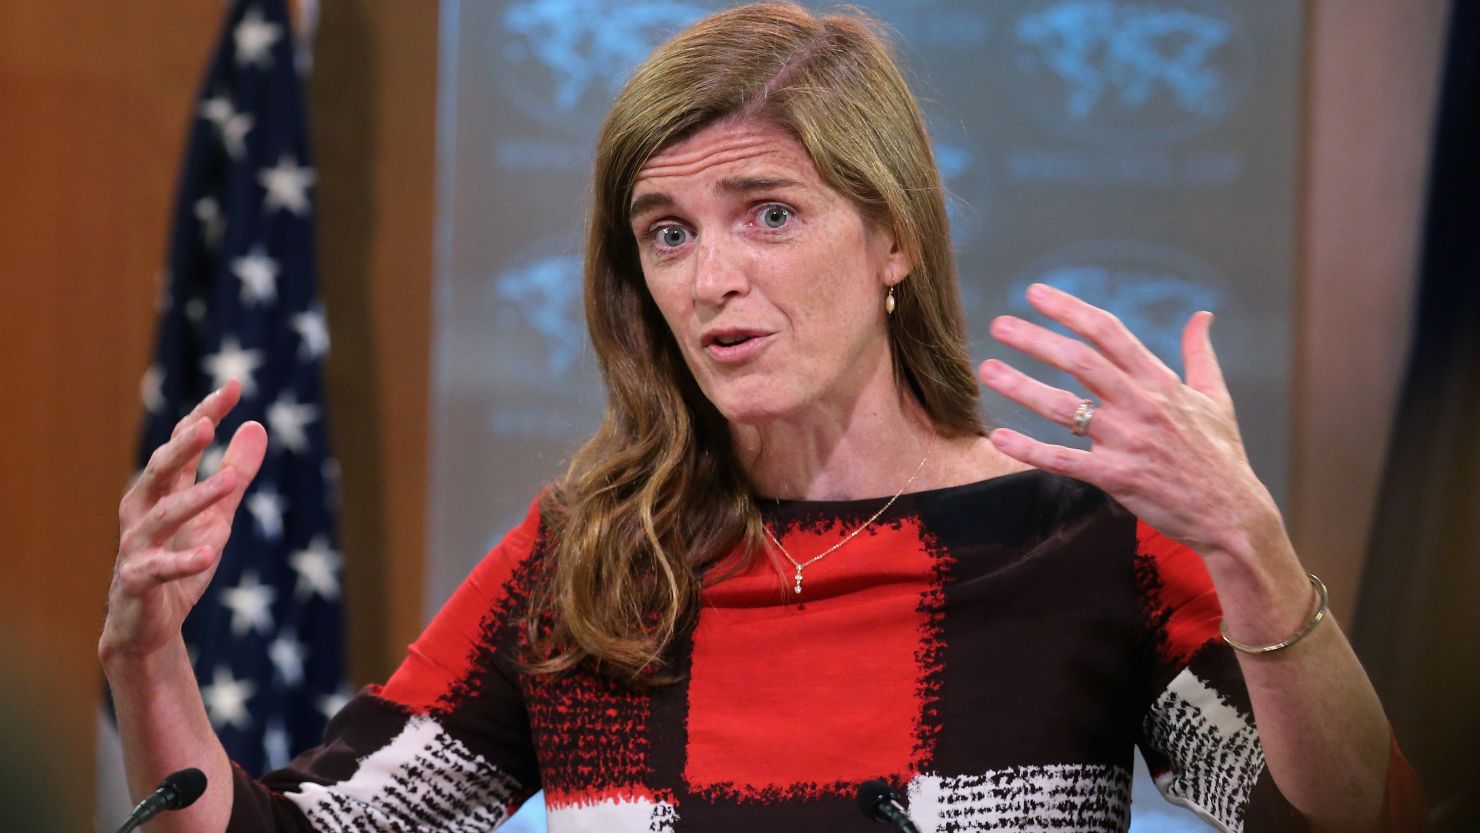 US Ambassador to the United Nations Samantha Power announces the start of the #FreeThe20 campaign from the State Department September 1, 2015 in Washington, DC. (Photo by Chip Somodevilla/Getty Images)